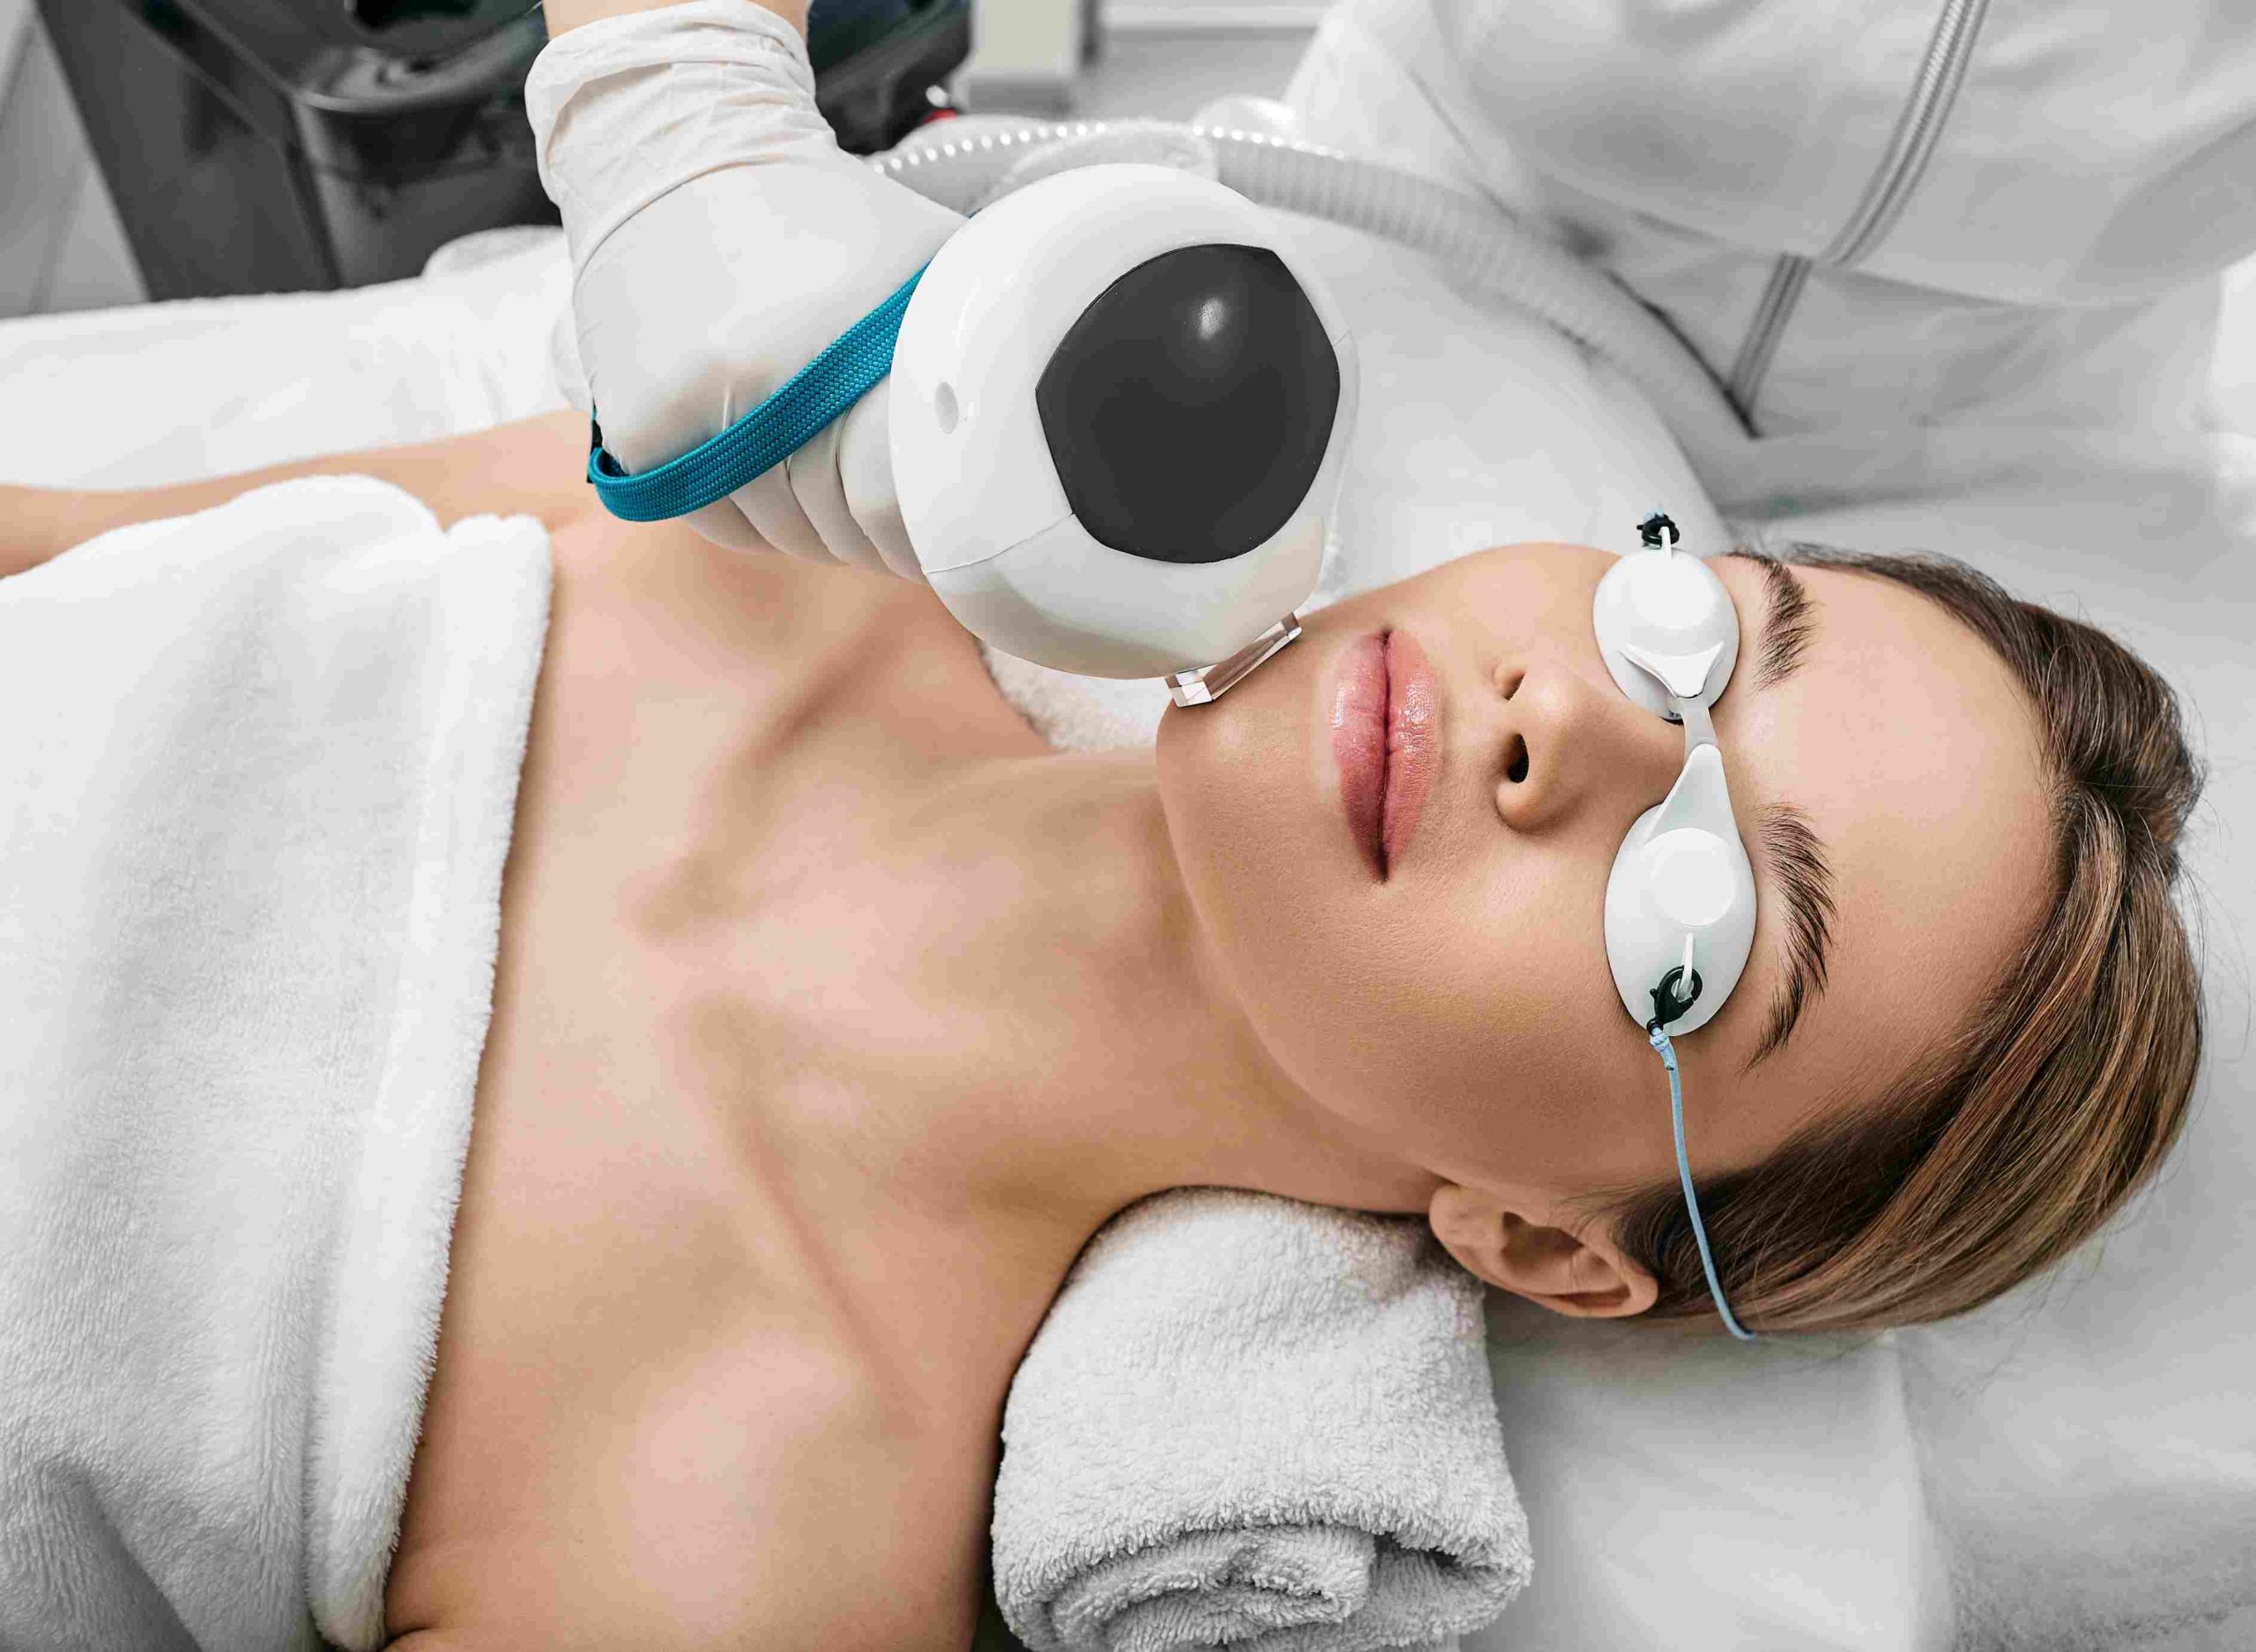 Young Girl Getting ThreeForMe Laser Treatment by Wearing Safety Goggles | Avail Aesthetics in Wake Forest, NC